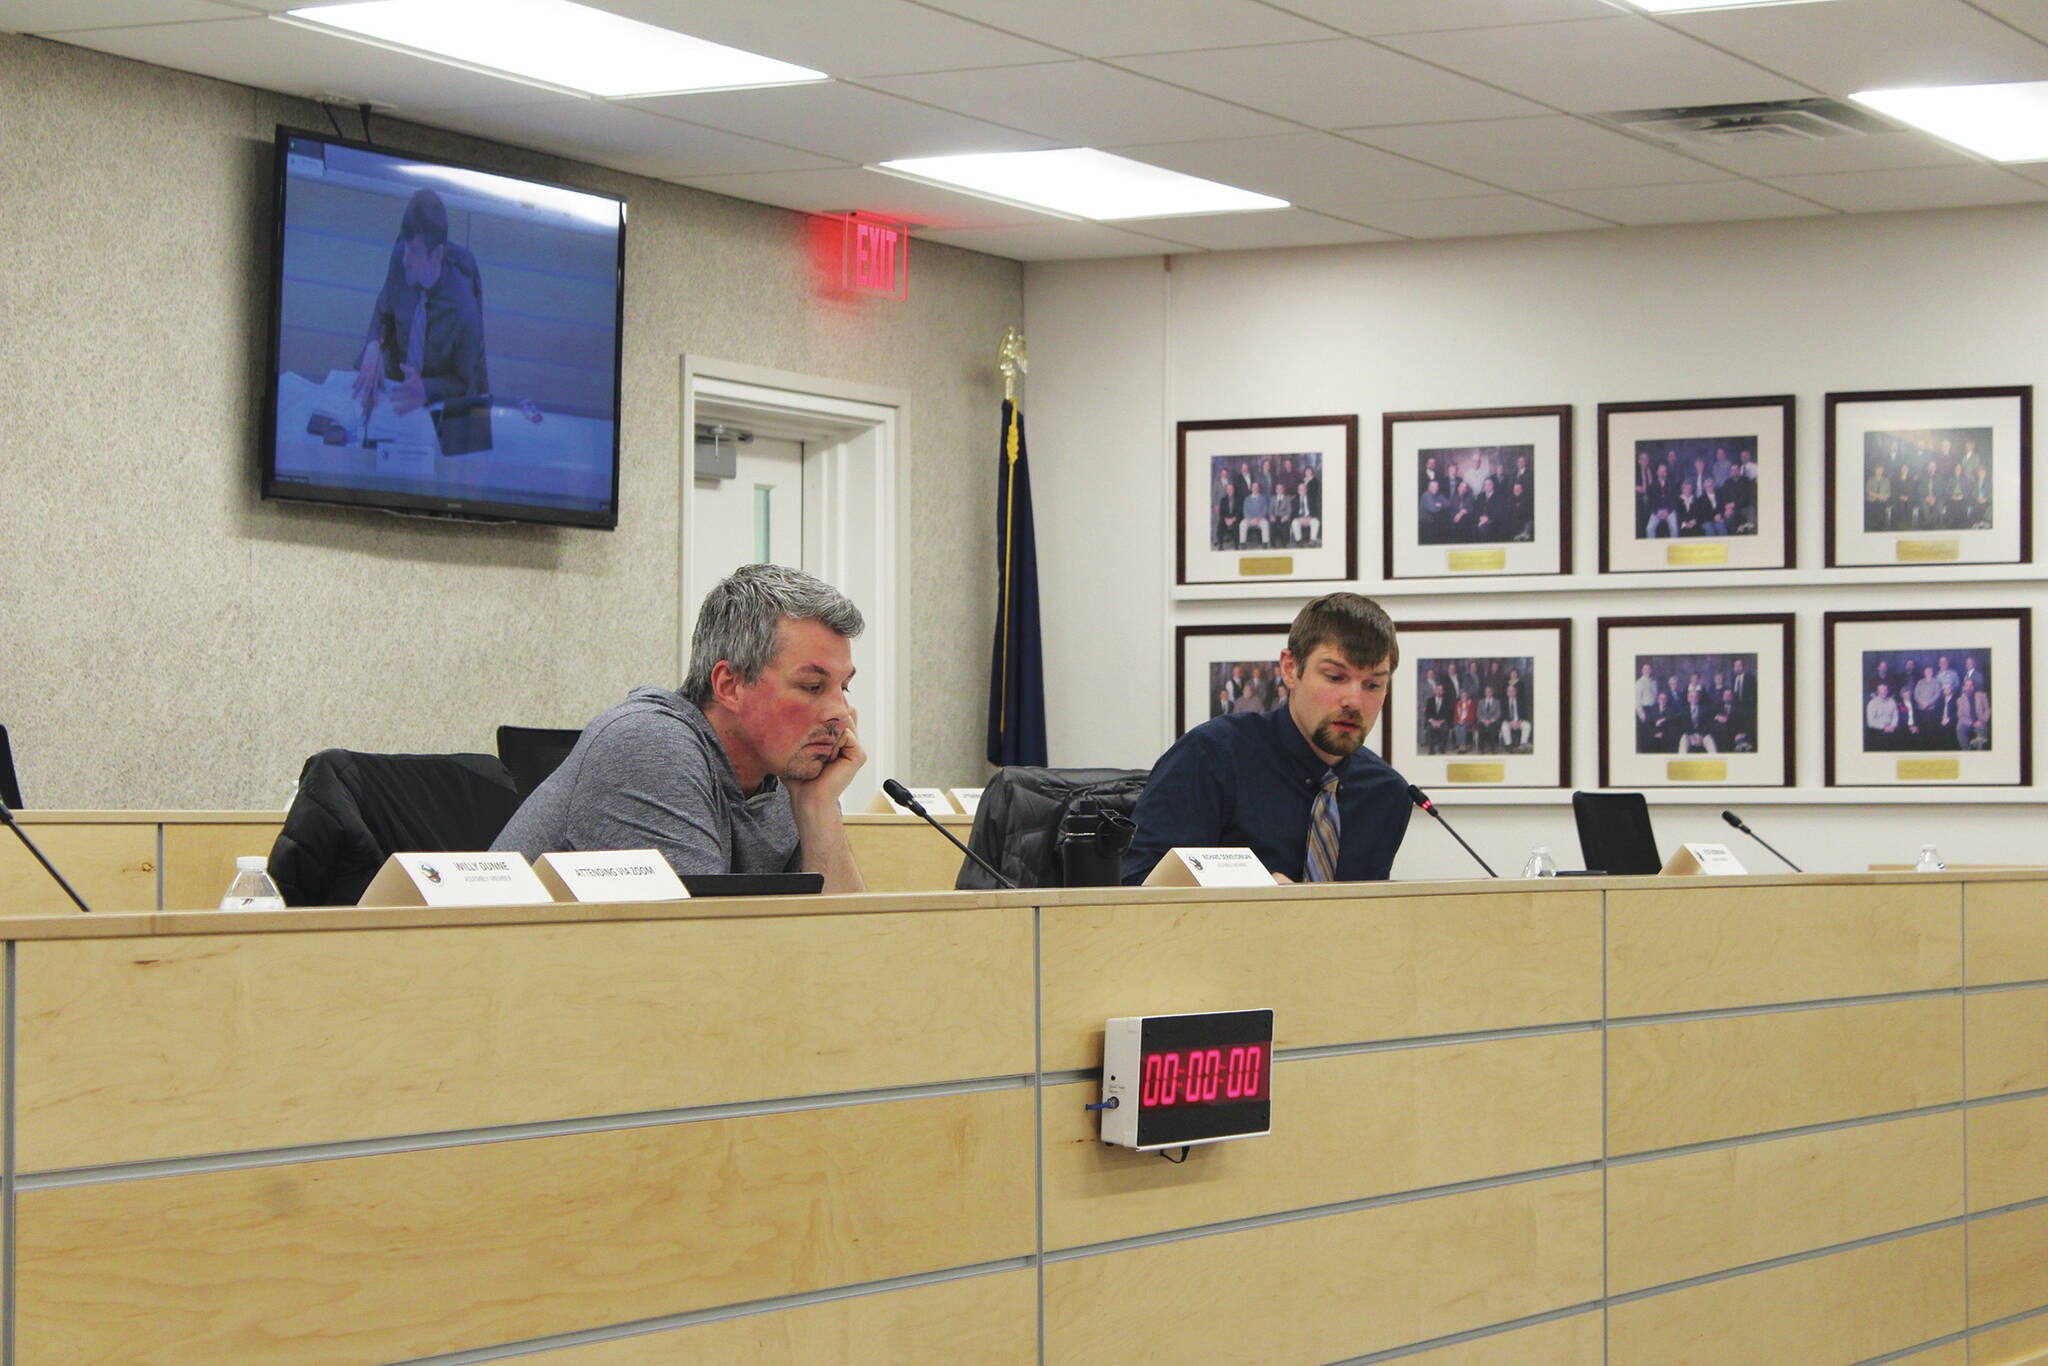 Kenai Peninsula Borough Assembly members Richard Derkevorkian (left) and Jesse Bjorkman (right) participate in the assembly’s Tuesday, Feb. 16, 2021 meeting at the borough assembly chambers in Soldotna, Alaska. The assembly voted Tuesday to fund 13 new positions for four fire and EMS service areas. (Photo by Ashlyn O’Hara/Peninsula Clarion)